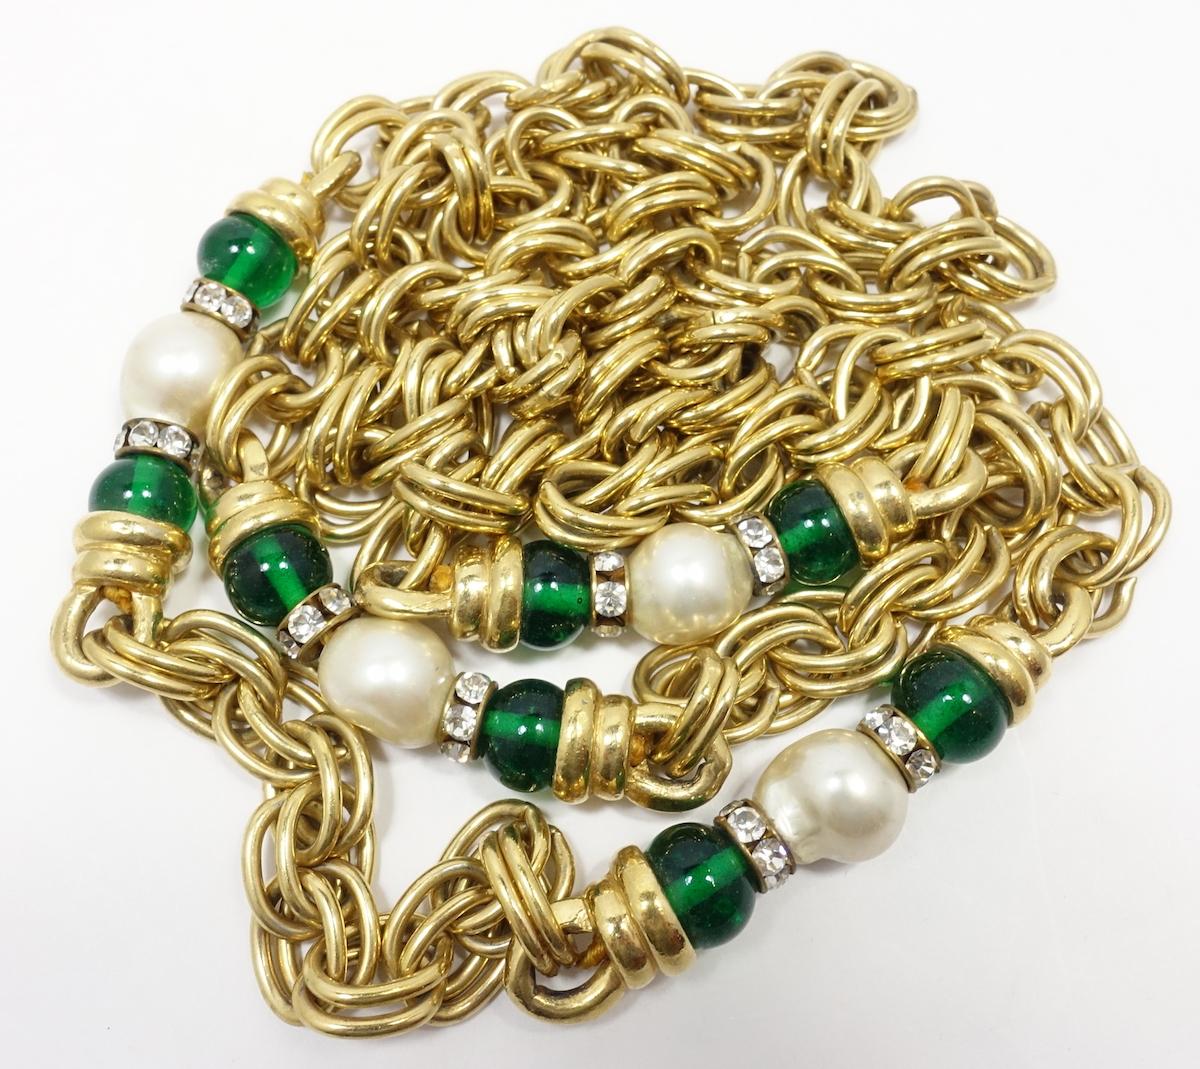 Women's Vintage Long Faux Pearl  & Green Bead Chain Link Rope Sautoir Necklace  